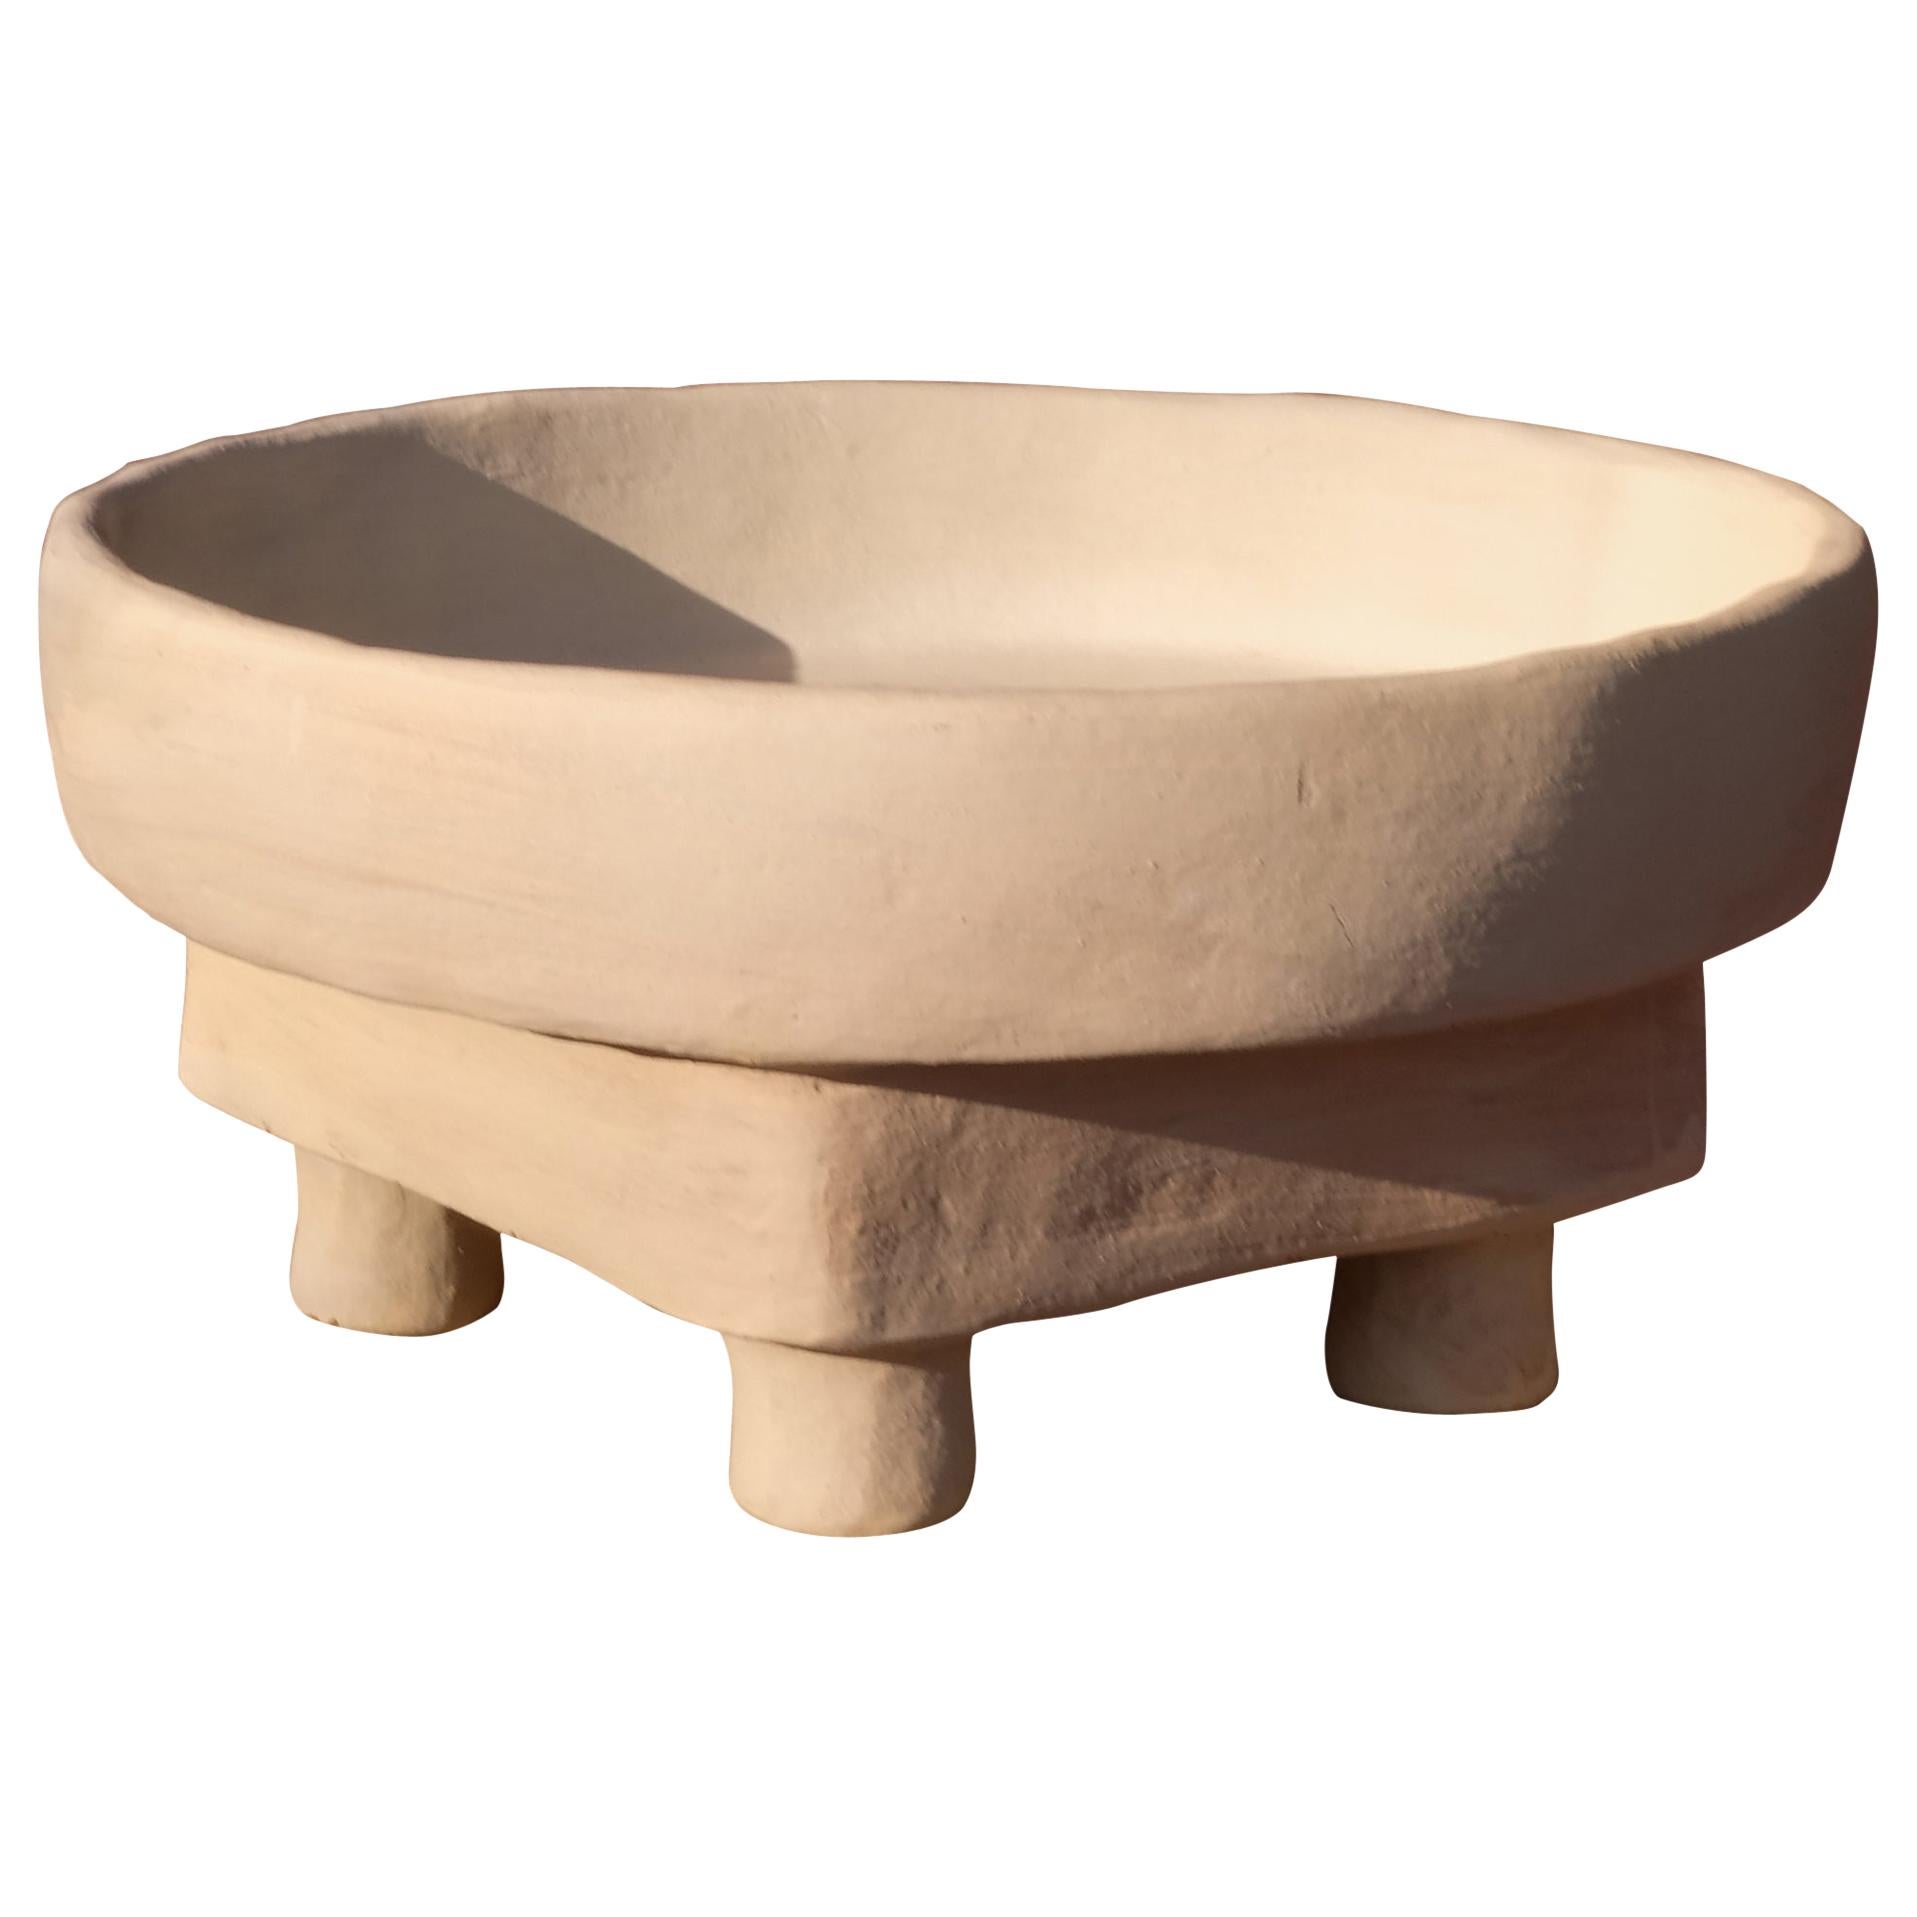 Contemporary white Side Table Made of Clay Handcrafted by the Potter Houda